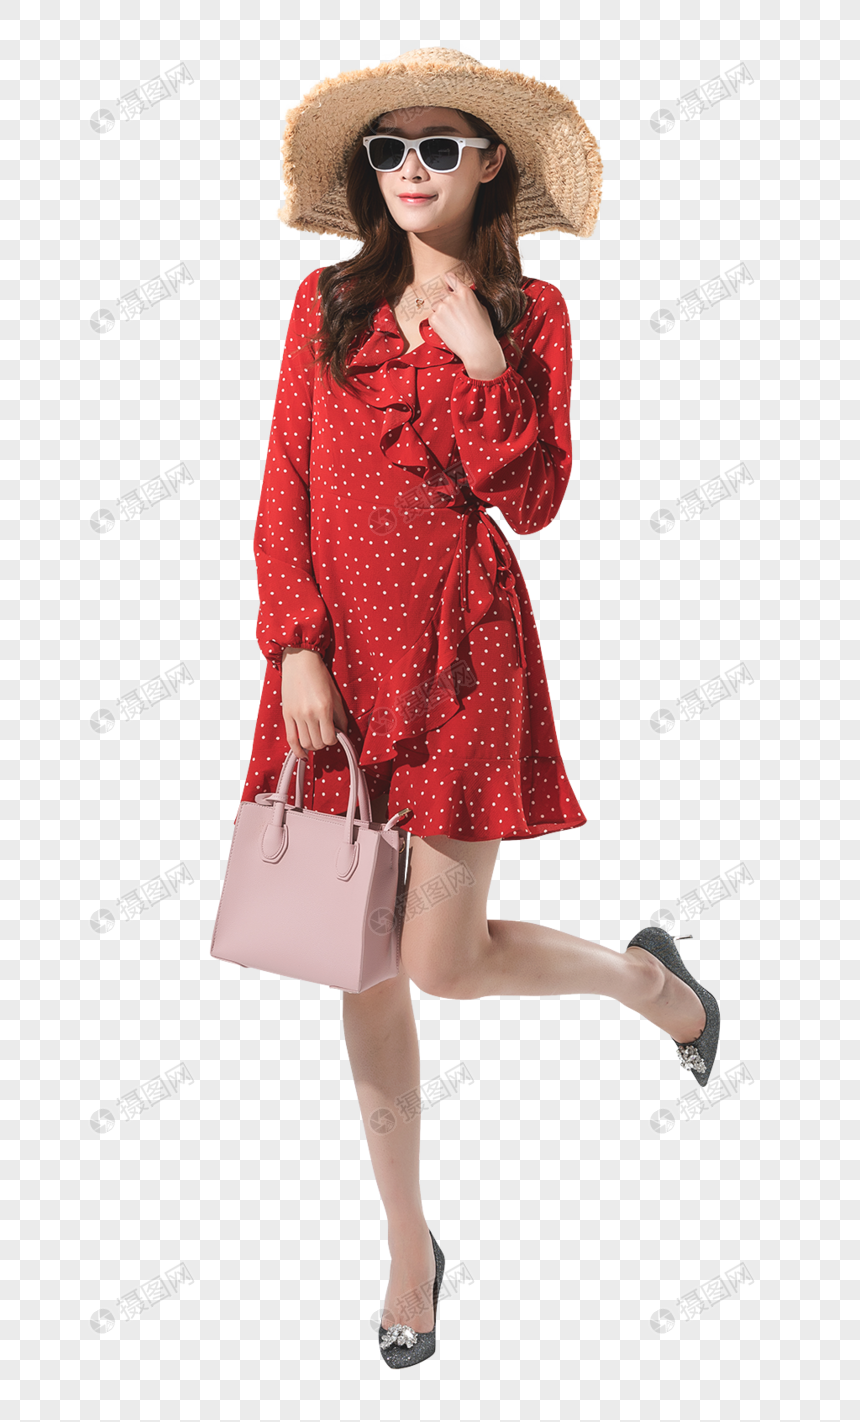 Fashion Womens Summer Shopping Image PNG Picture And Clipart Image For ...